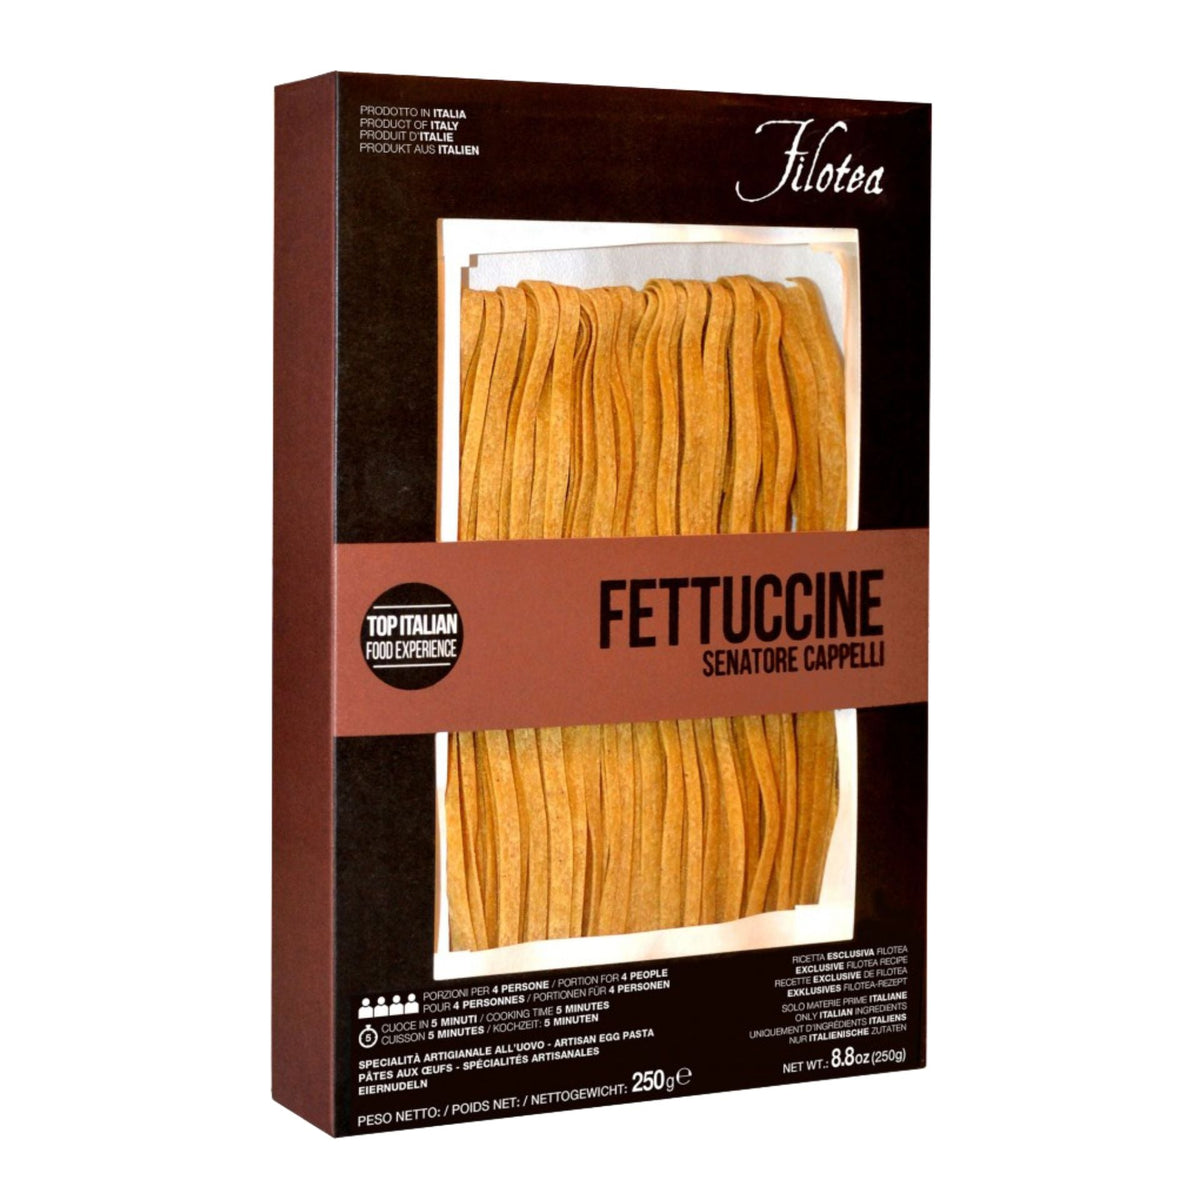 Filotea Senatore Cappelli Fettuccine 250g  | Imported and distributed in the UK by Just Gourmet Foods